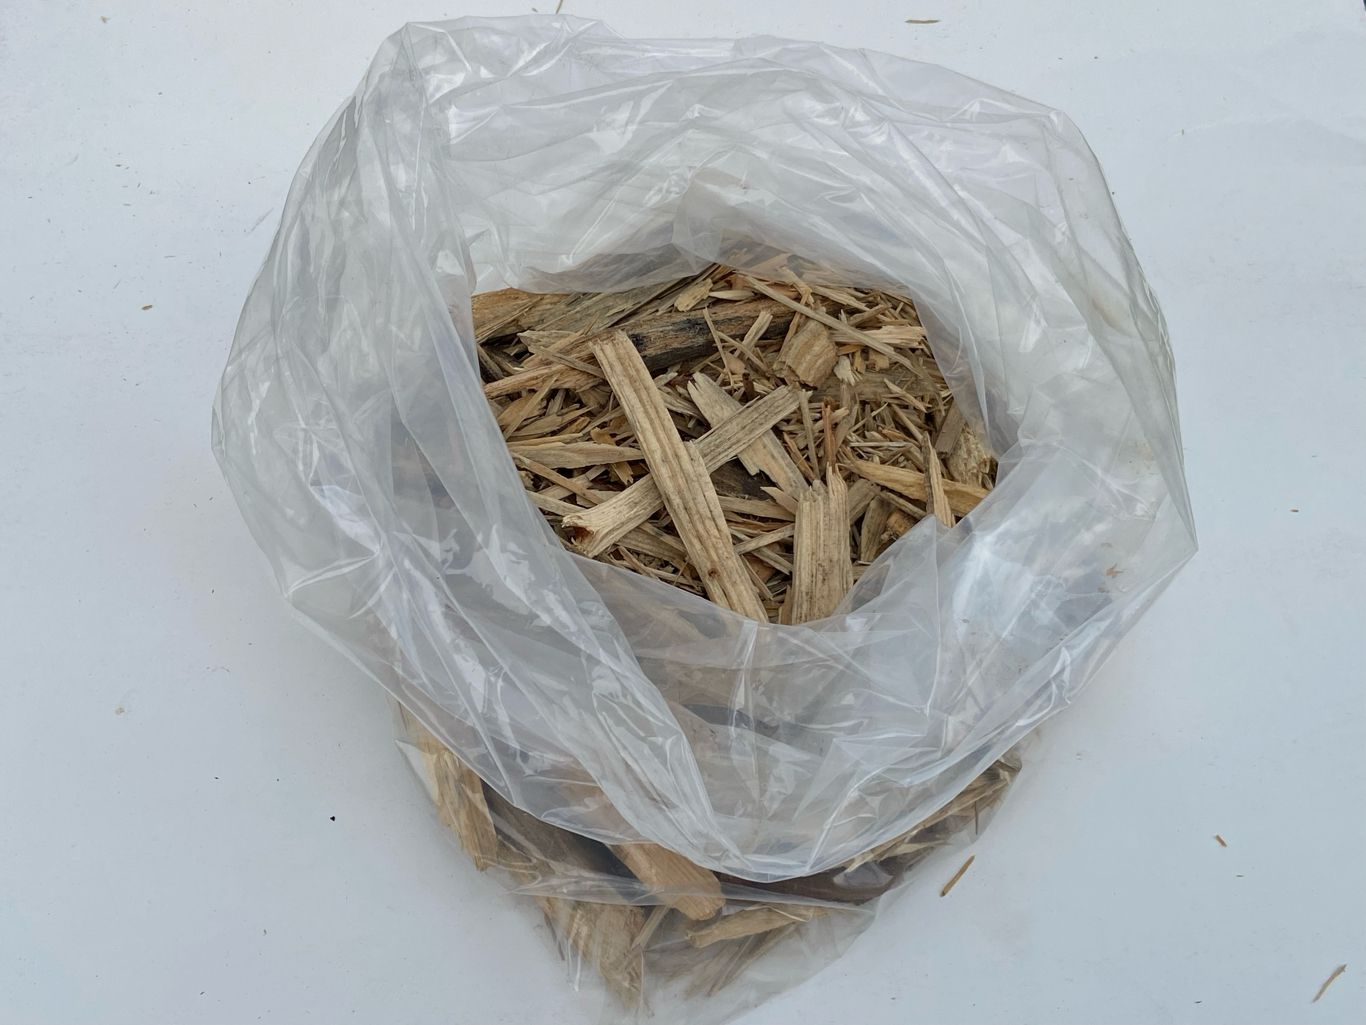 Fire Starting Wood Chips 2 LBS for Camping & Outdoor Use